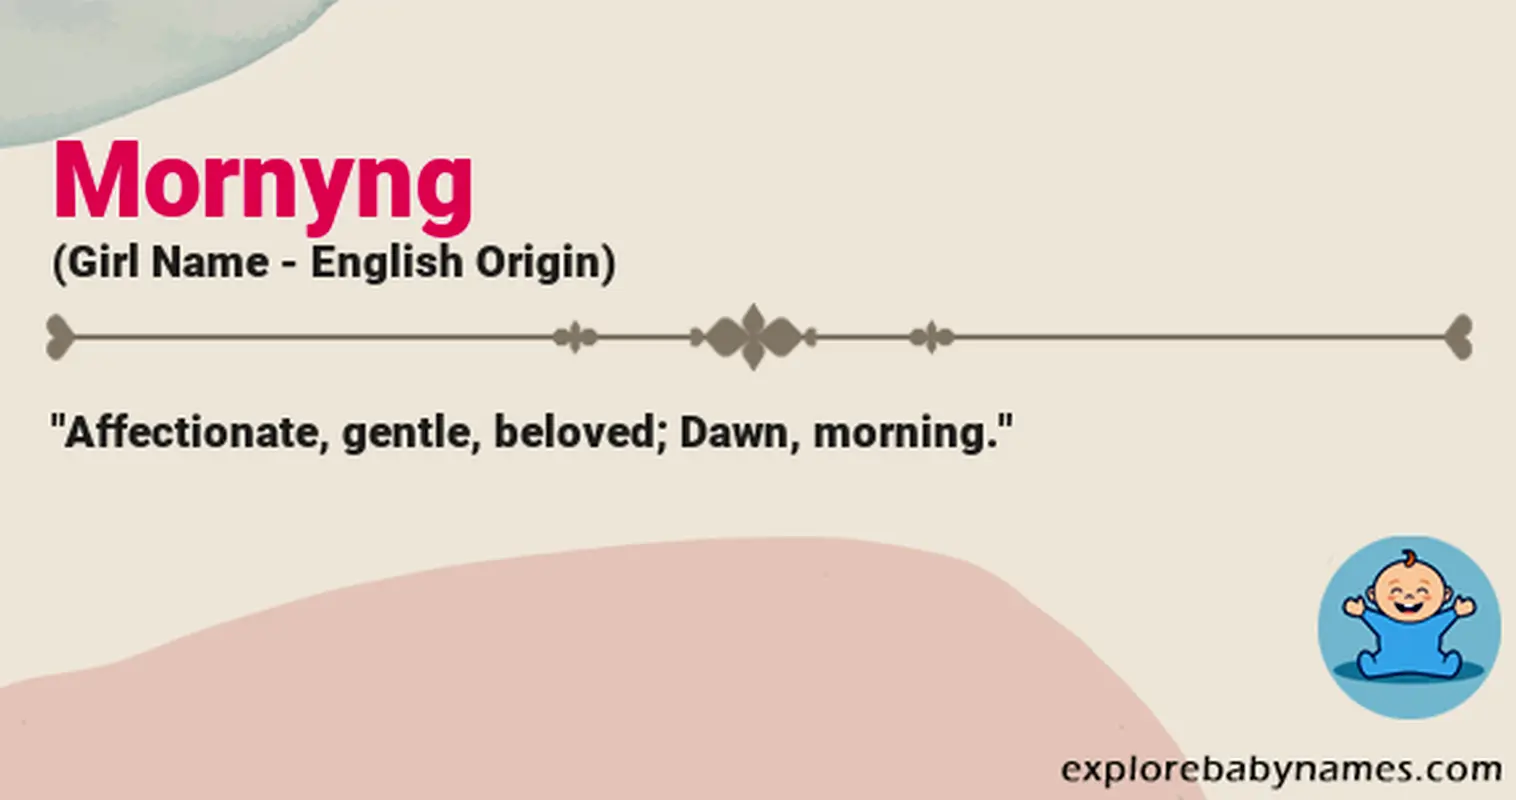 Meaning of Mornyng